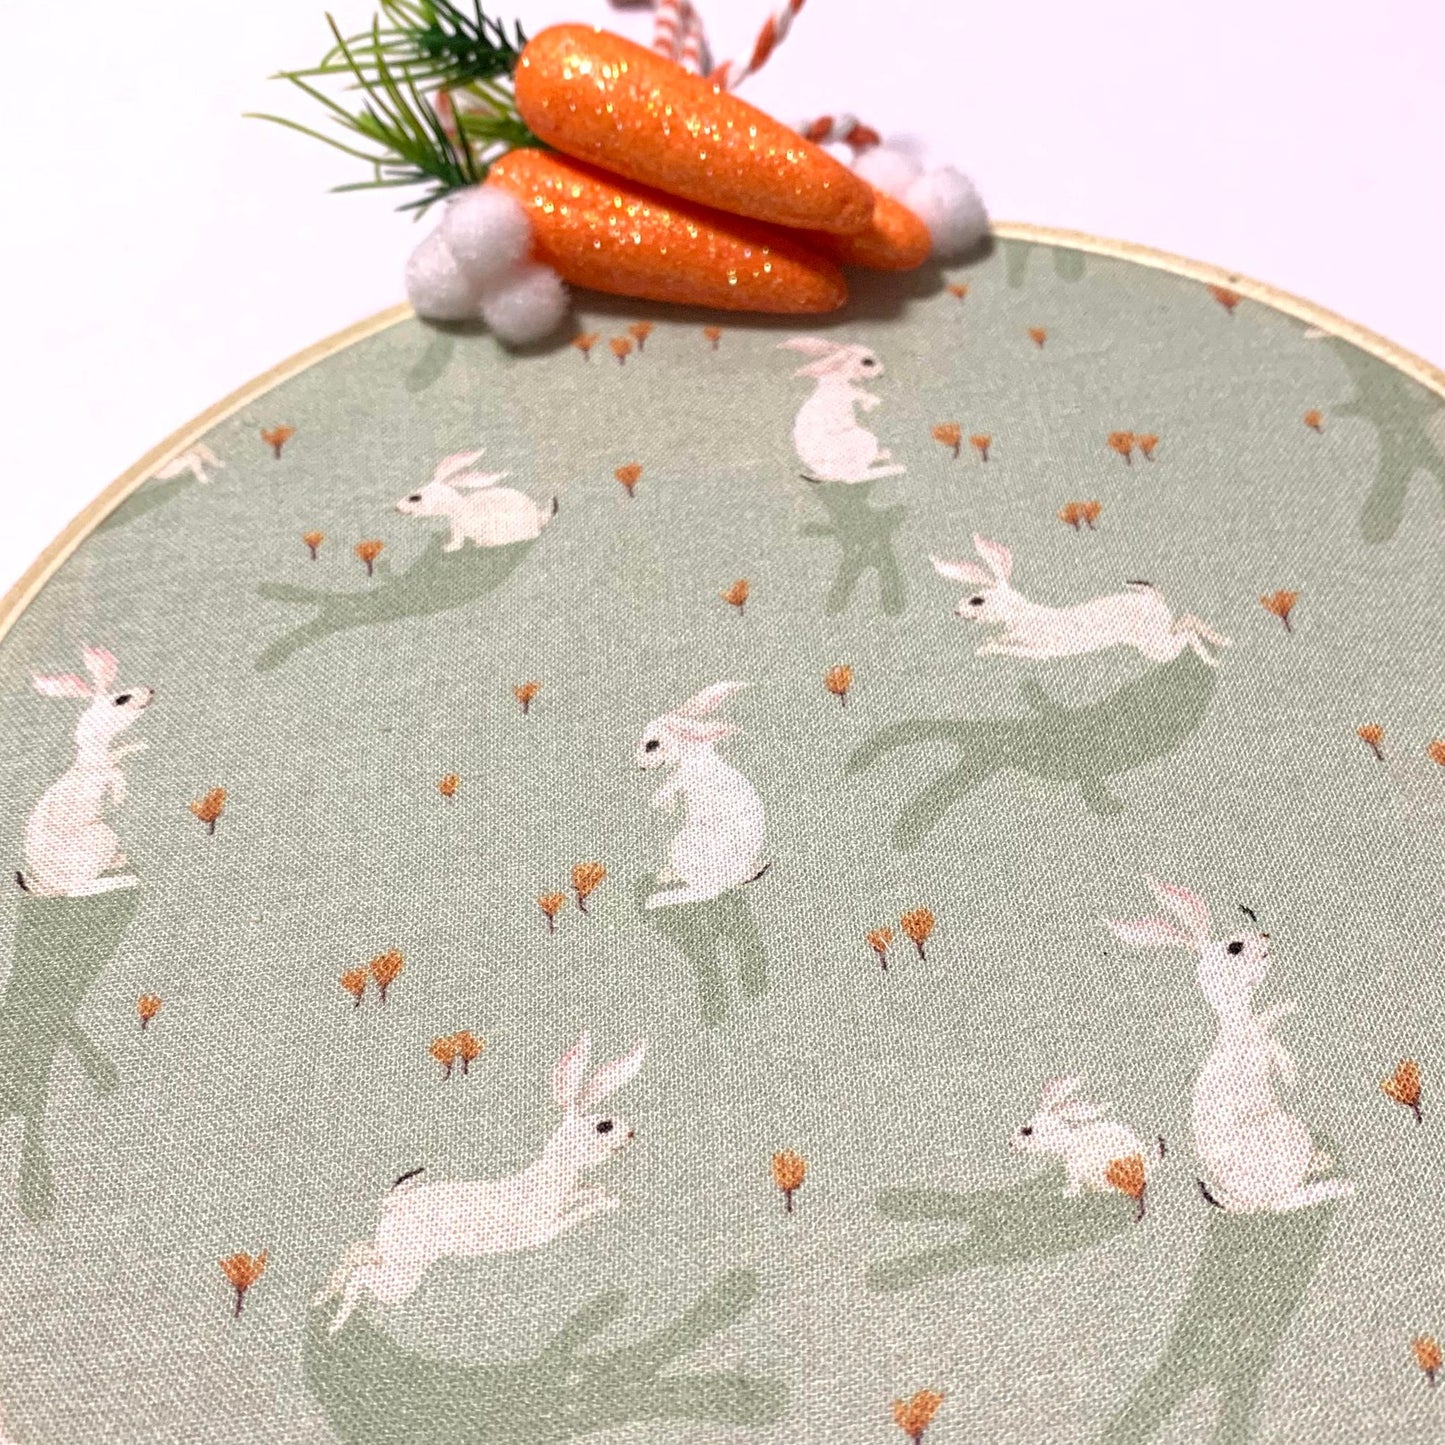 THIS BIRD HAS FLOWN- "Bunny Shadows" Large Embroidery Hoop Easter Decoration